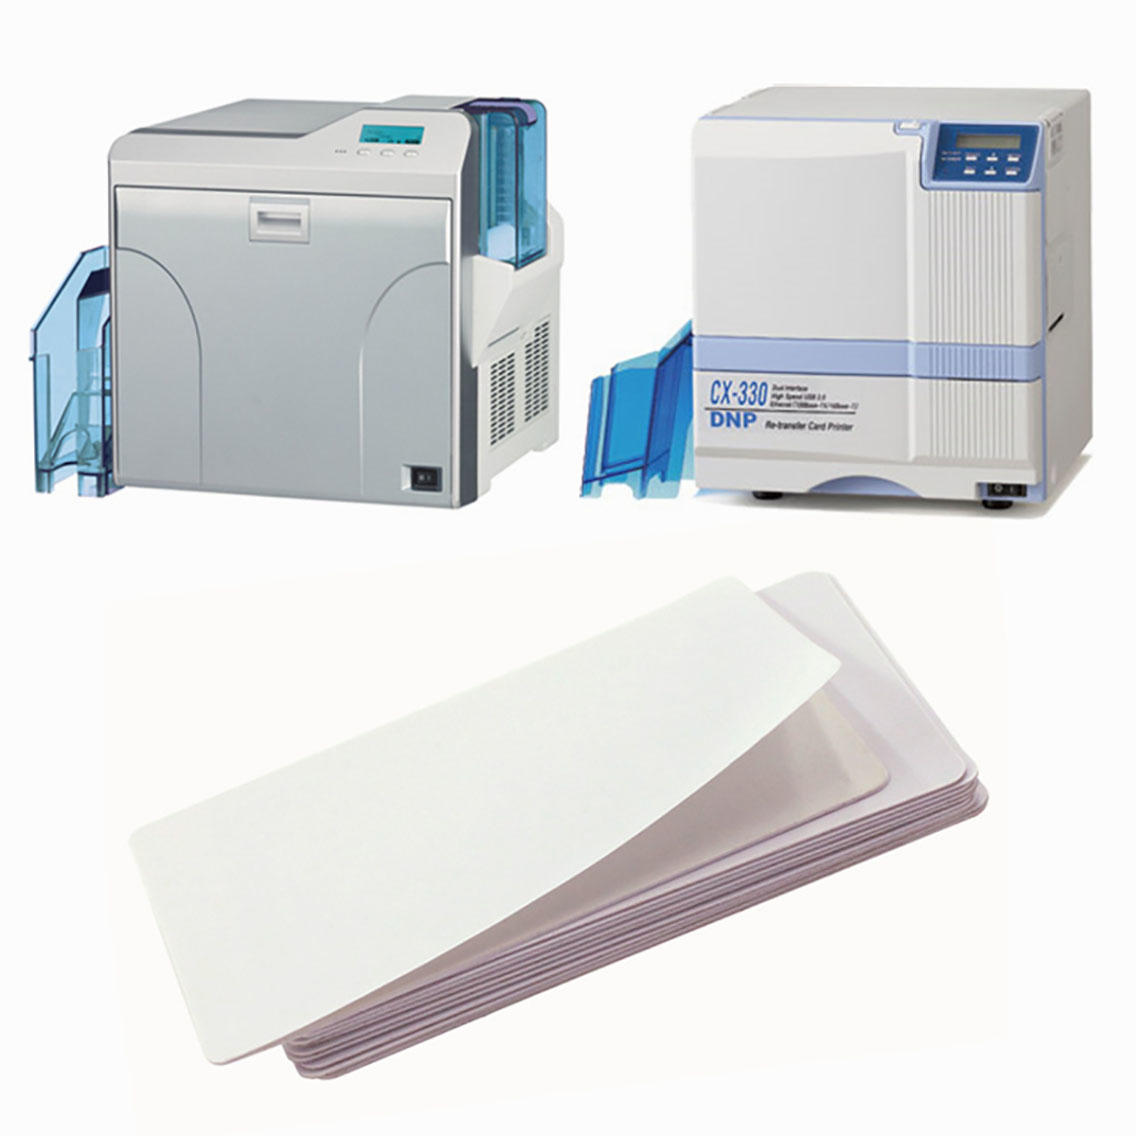 Cleanmo PVC Dai Nippon IPA Cleaning wipes factory for DNP CX-210, CX-320 & CX-330 Printers